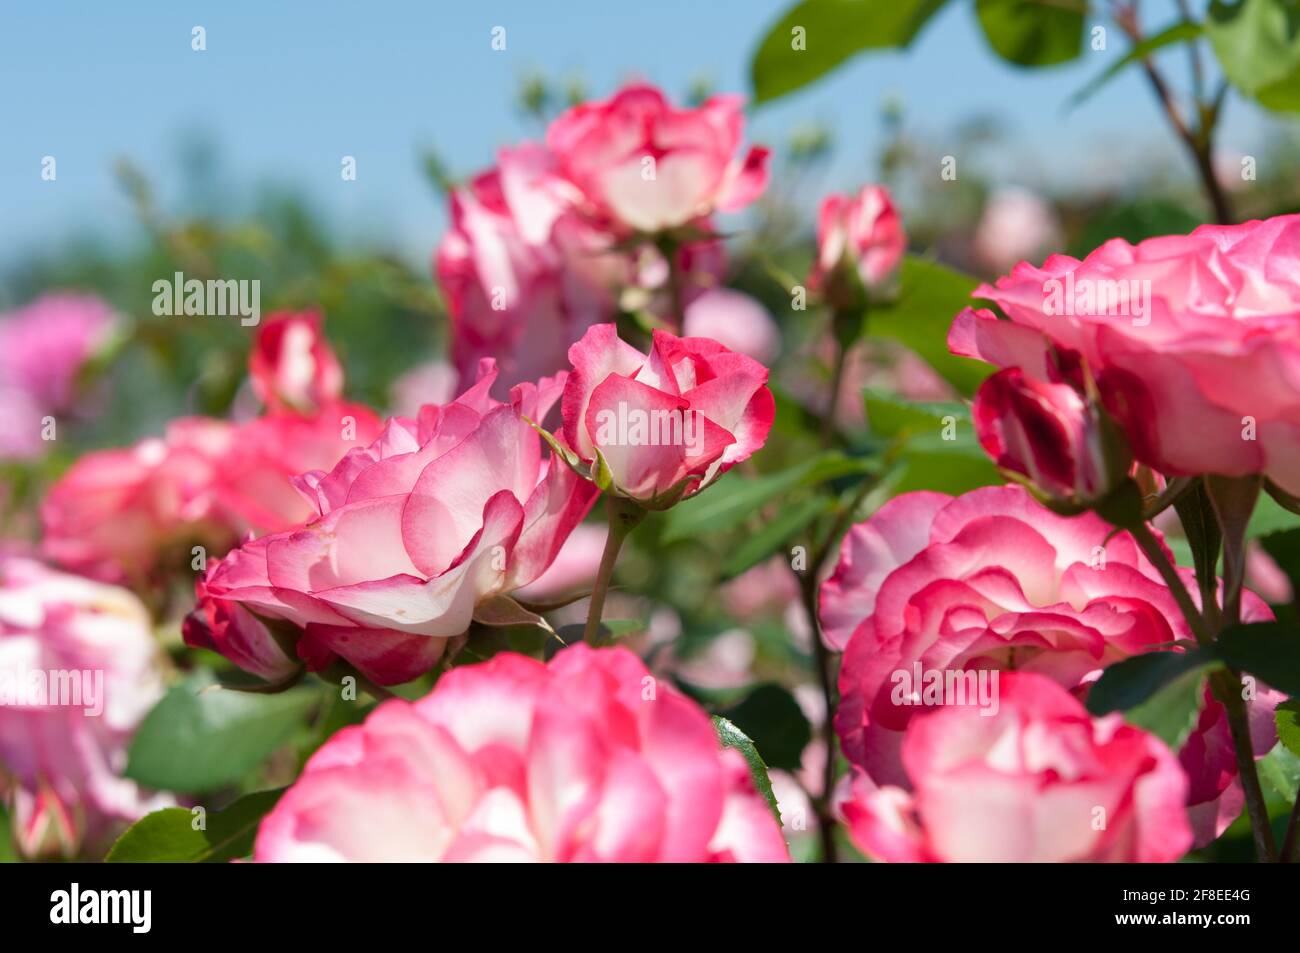 bi-coloured pink and white hybrid tea roses (rosa) in a public rose garden Stock Photo